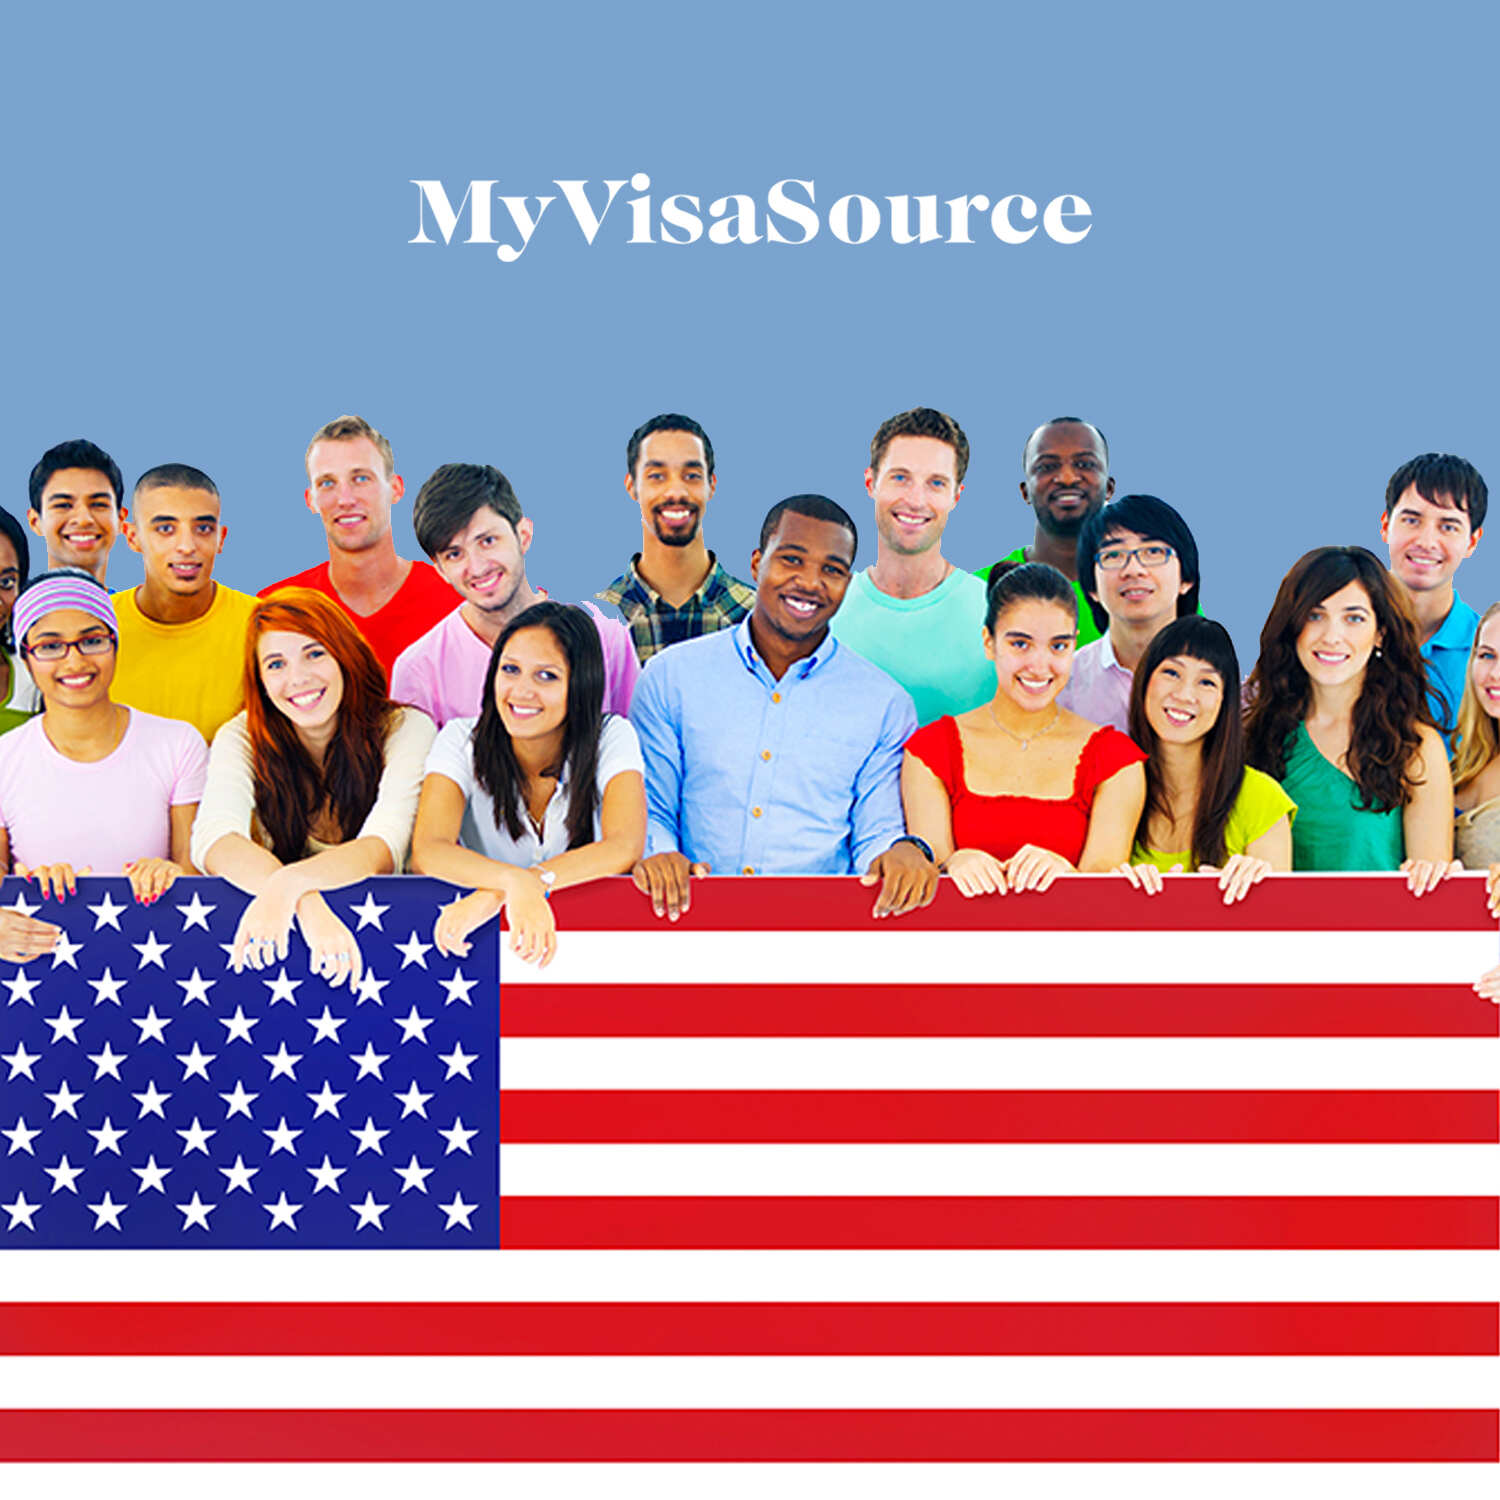 young students with different ethnicities posing behind an us flag my visa source